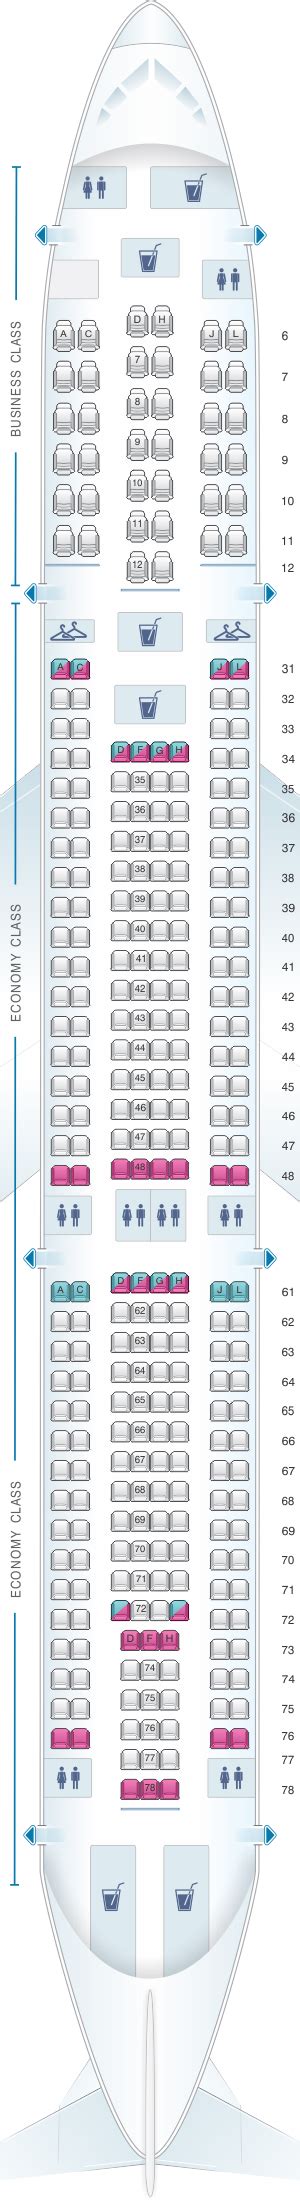 Seat Map China Eastern Airlines Airbus A330 300 300pax Seatmaestro